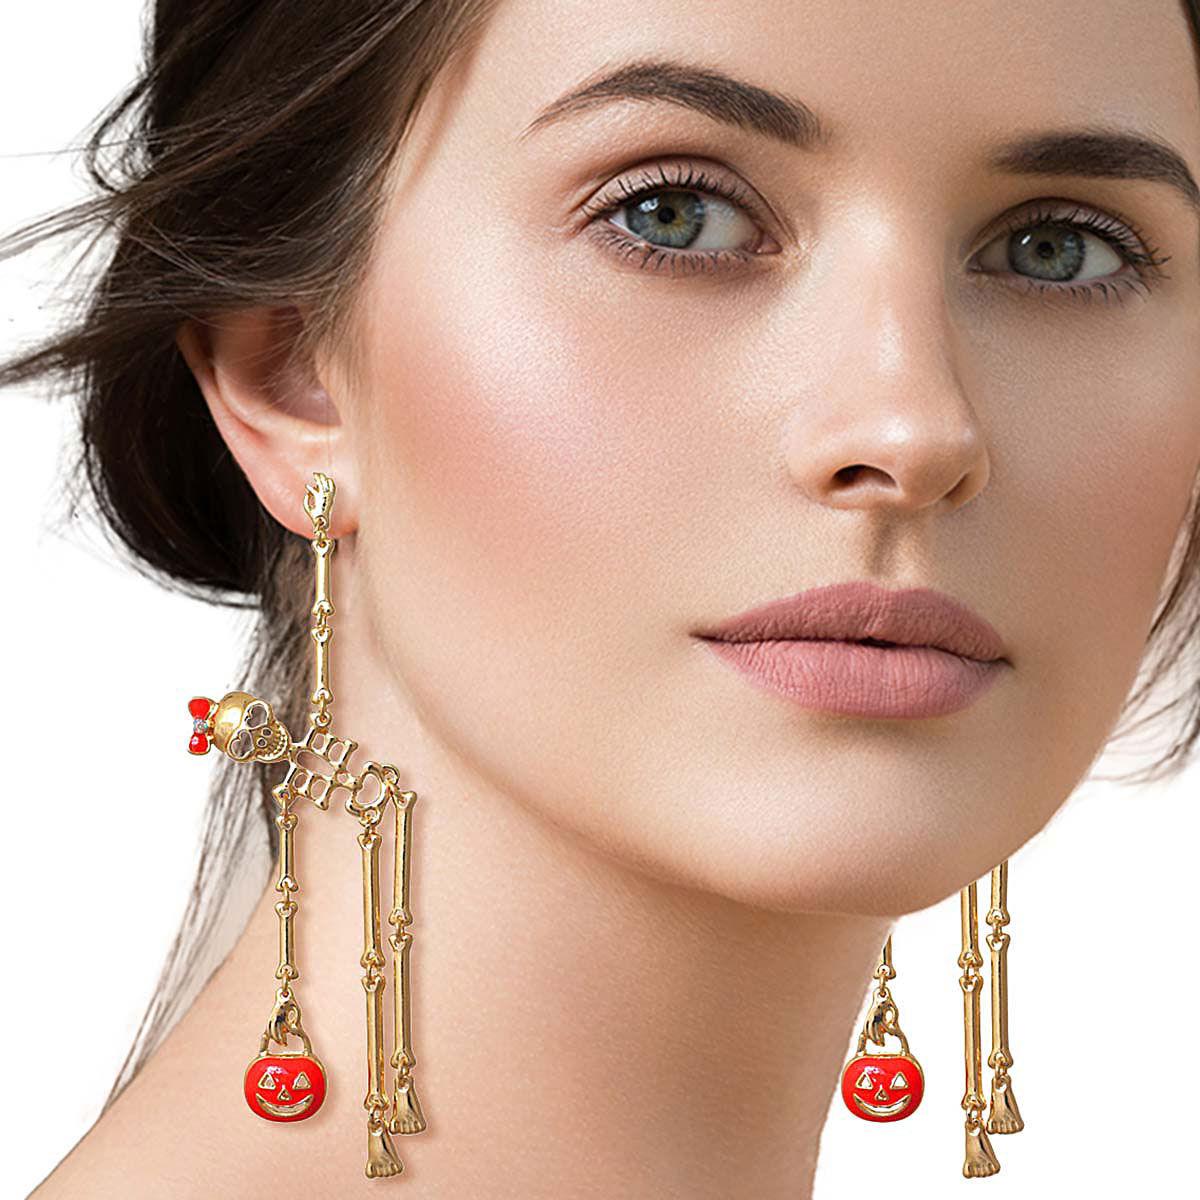 Bewitching Skeleton Dangle Earrings: Unearth Your Style